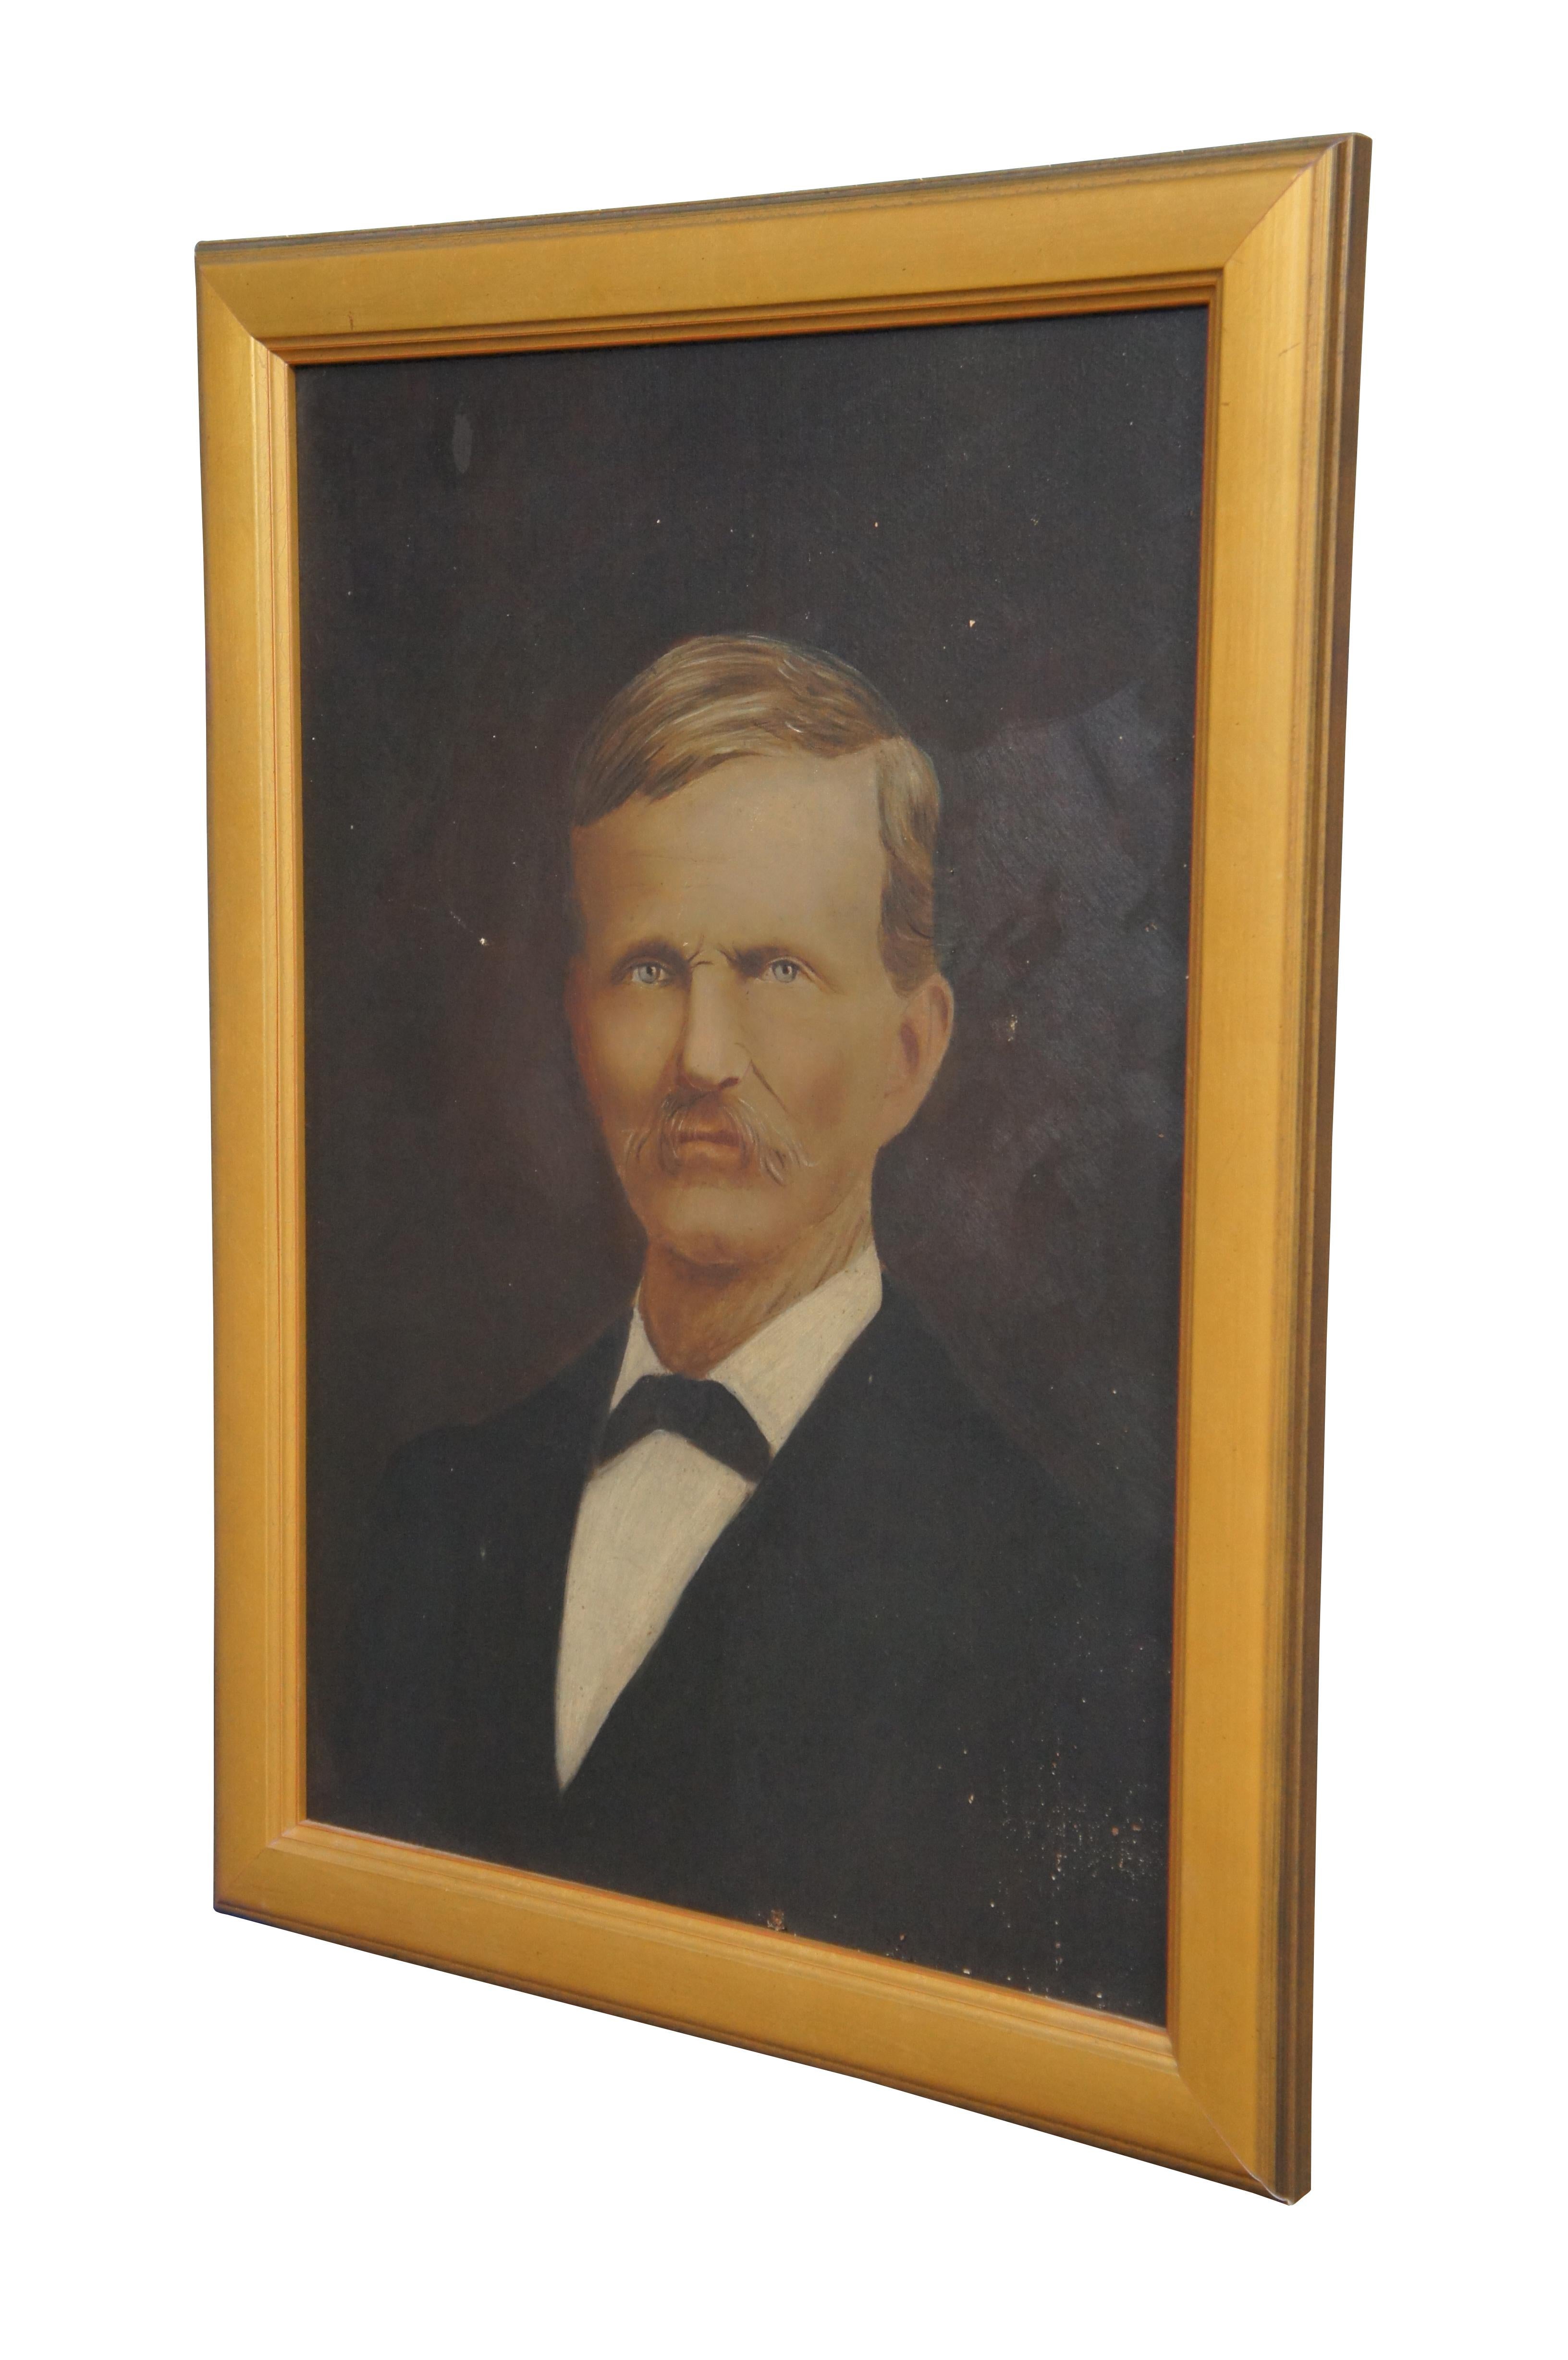 Antique oil on board portrait painting of a man dressed in formal attire with a light curling mustache and black suit coat / tuxedo and bowtie.

Measures : 19.25” x 1” x 26.5” / Sans Frame - 15.5” x 22.5” (Width x Depth x Height).